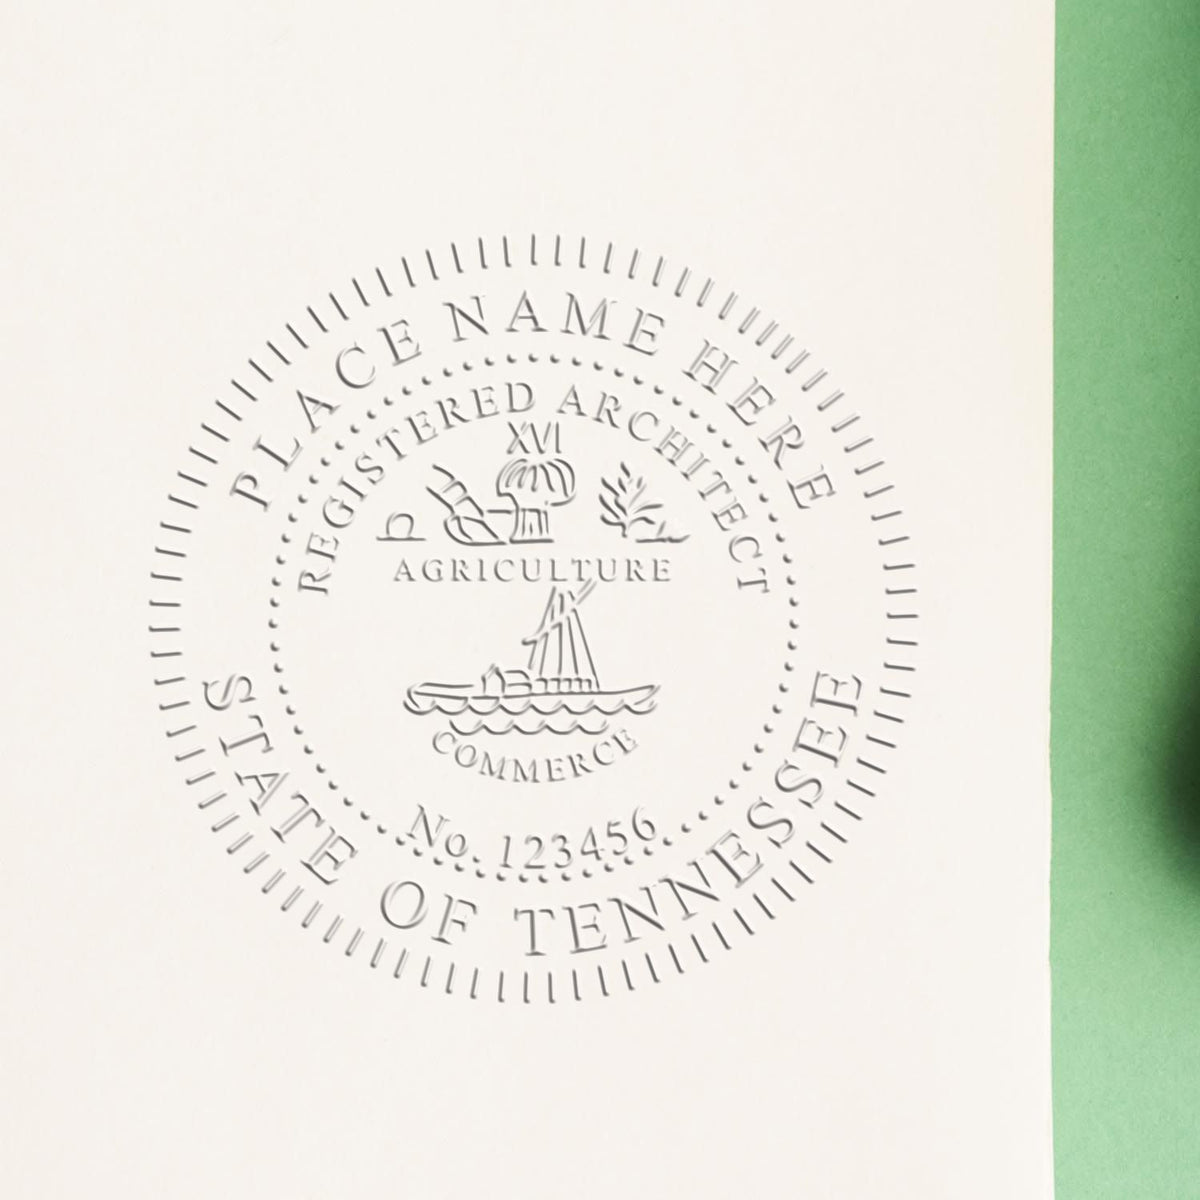 The Gift Tennessee Architect Seal stamp impression comes to life with a crisp, detailed image stamped on paper - showcasing true professional quality.